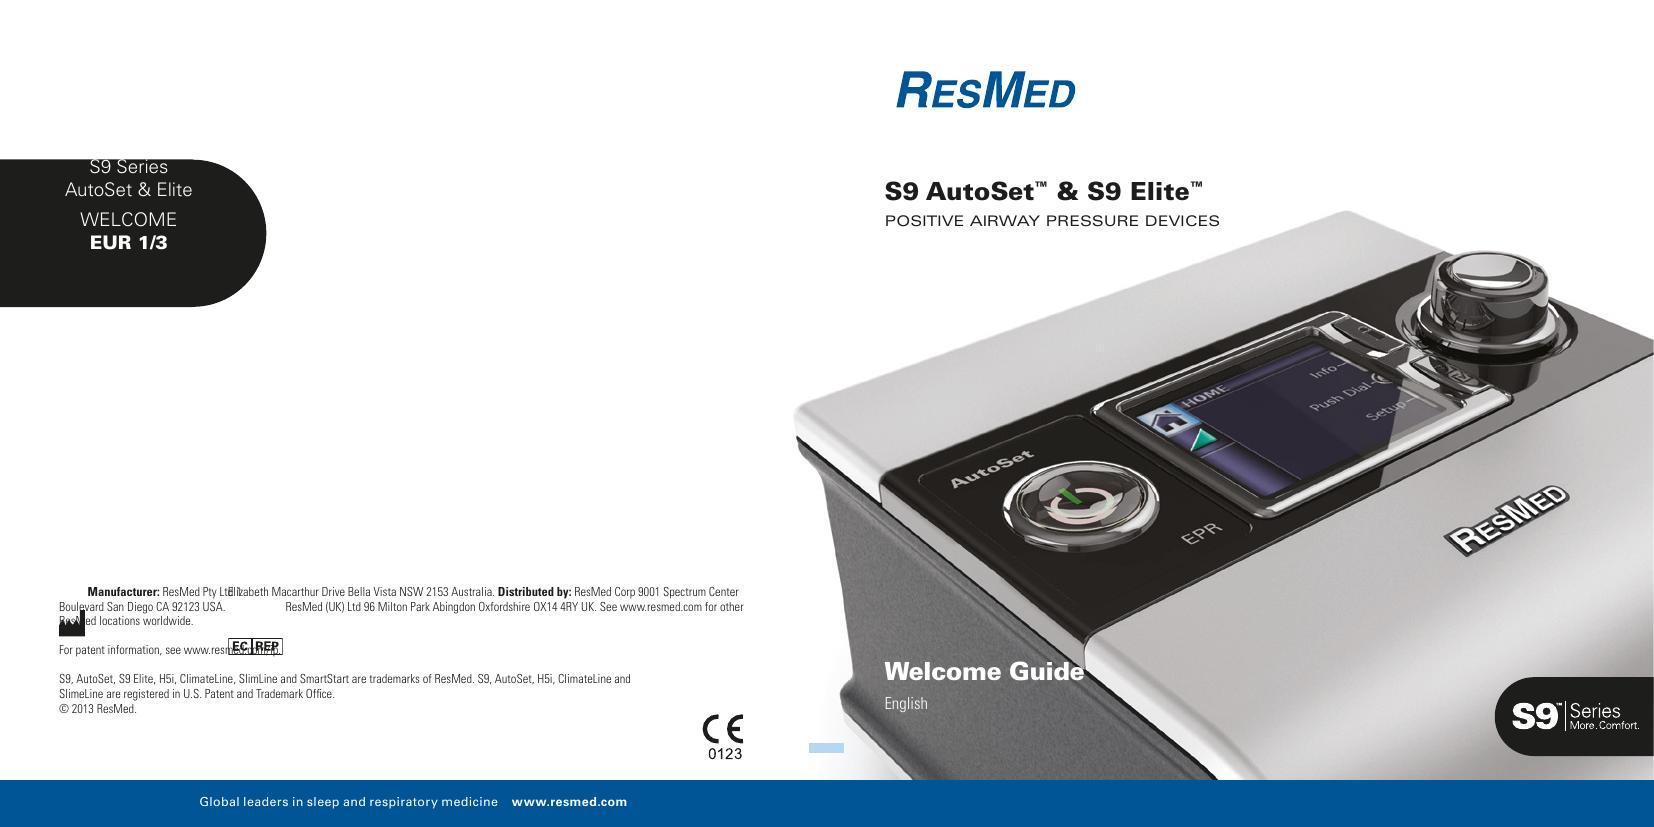 resmed-s9-series-autoset-elite-positive-airway-pressure-devices-welcome-guide.pdf